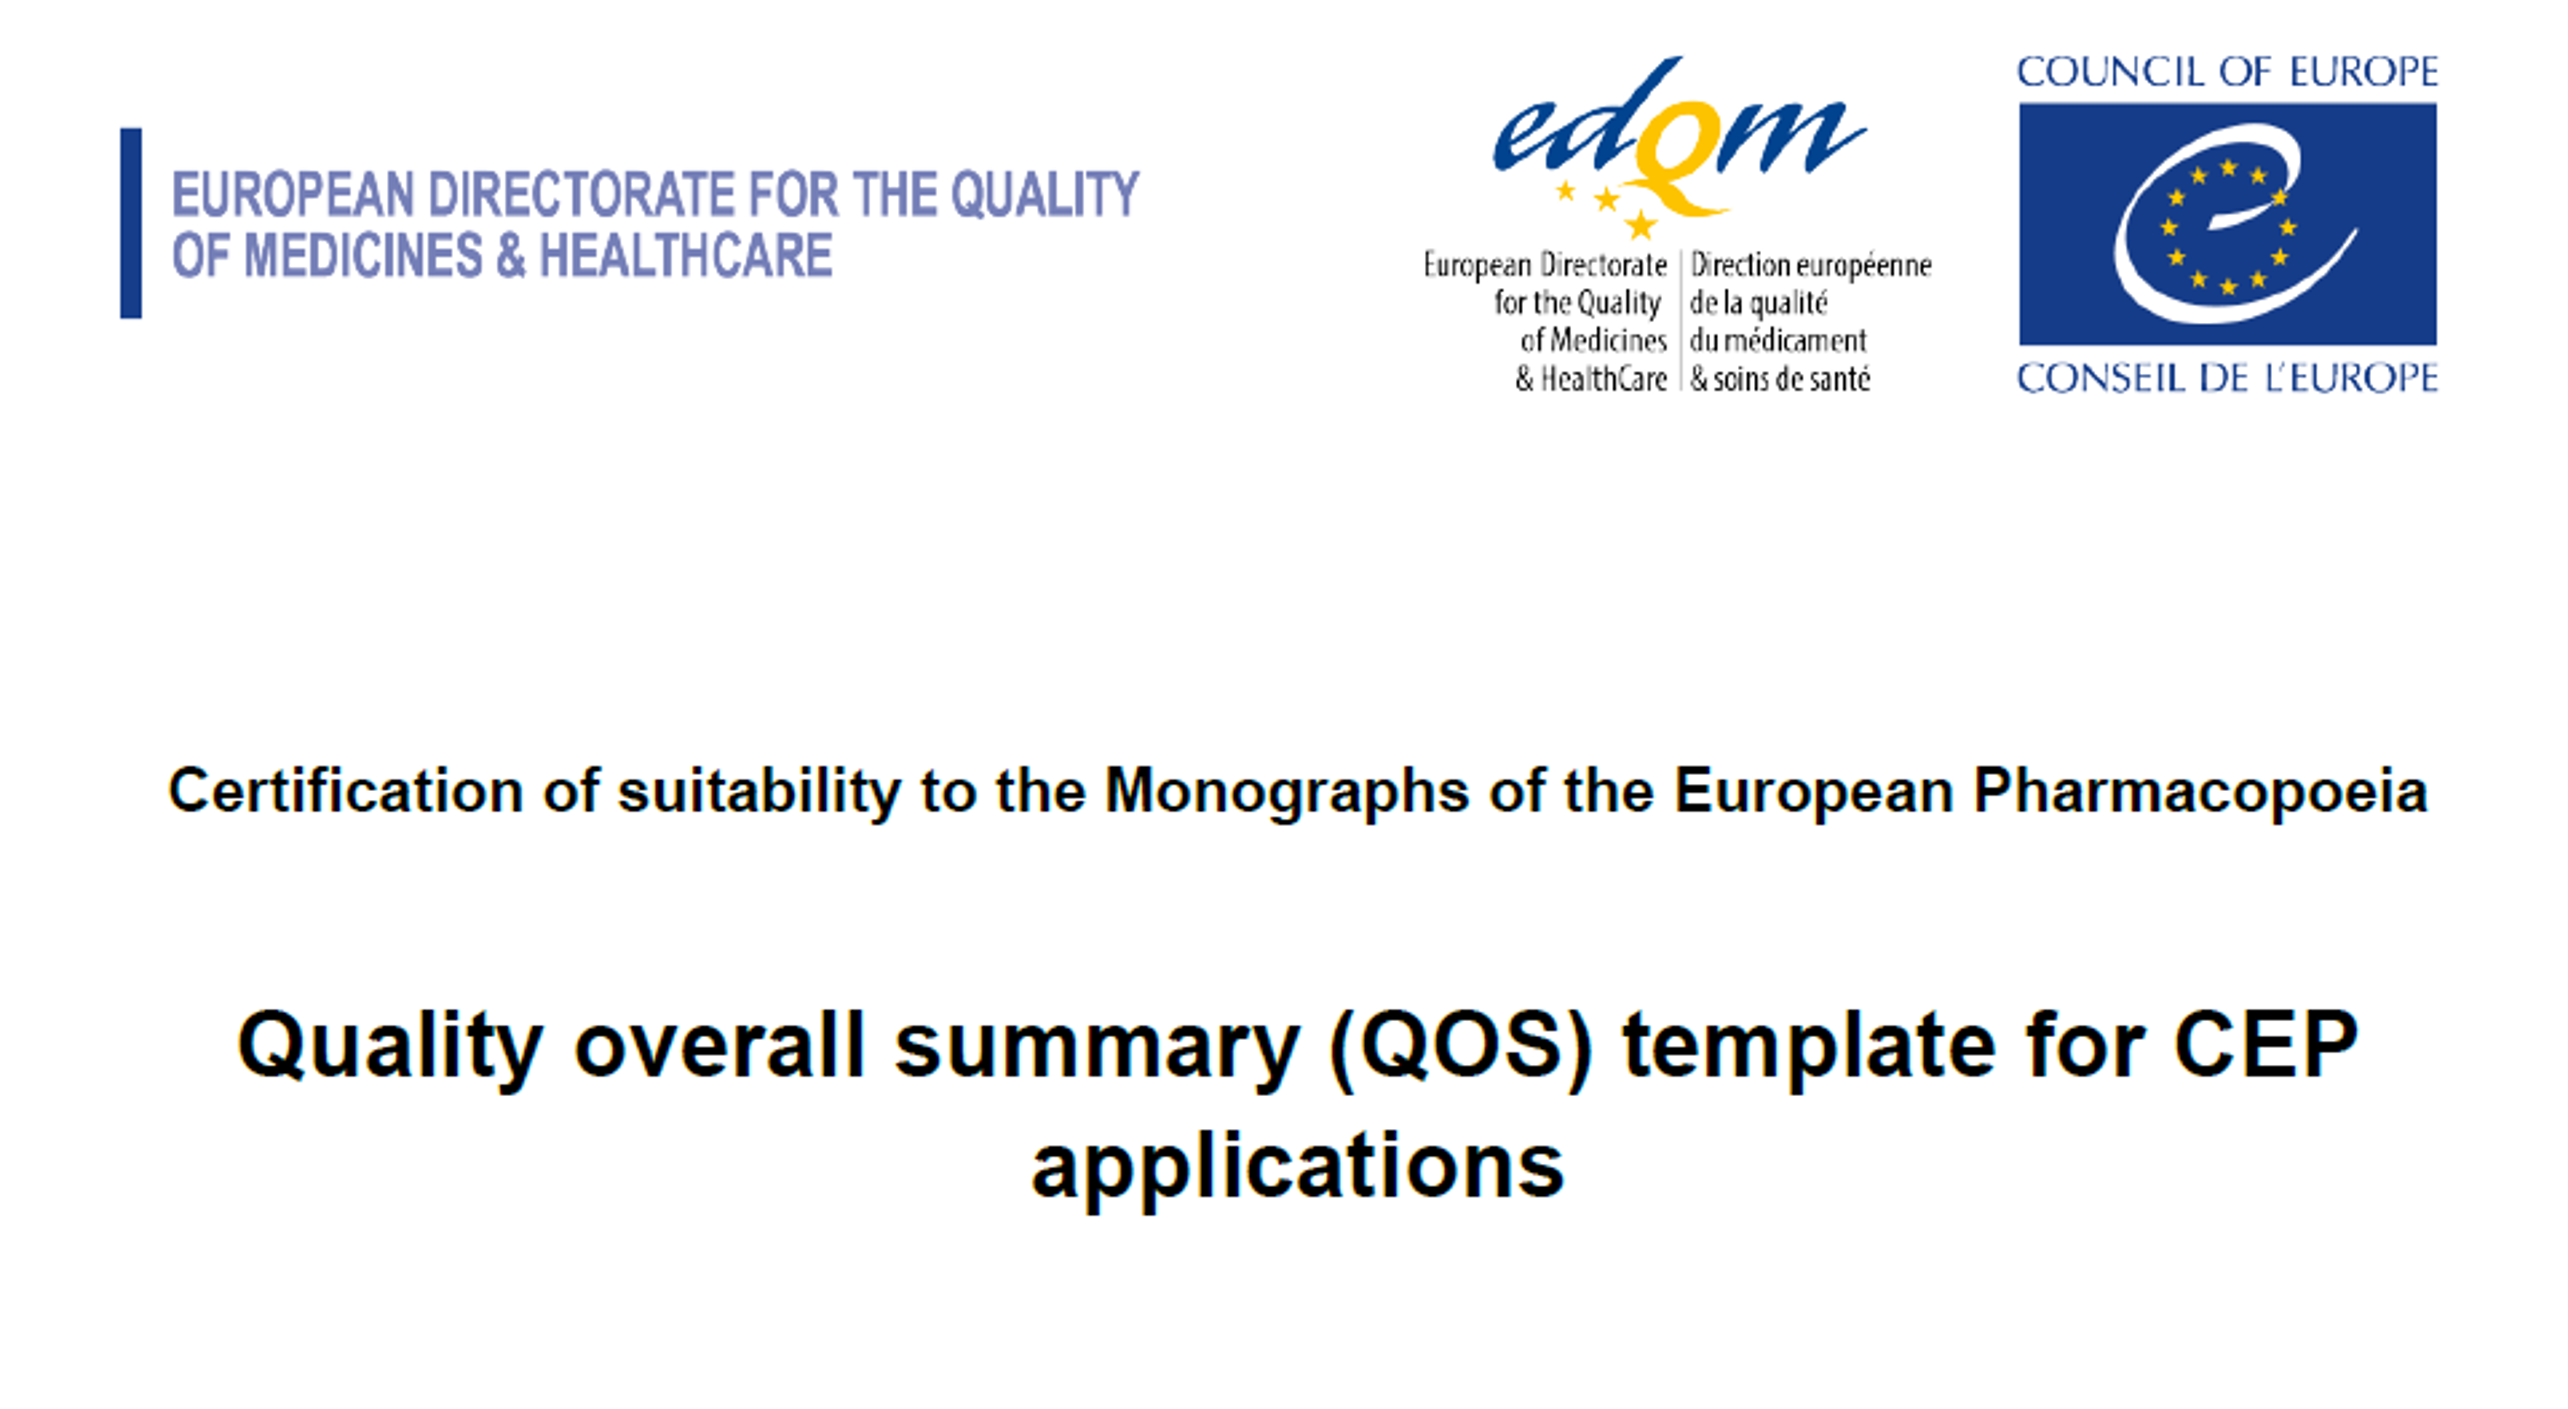 Quality-overall-summary-QOS-template